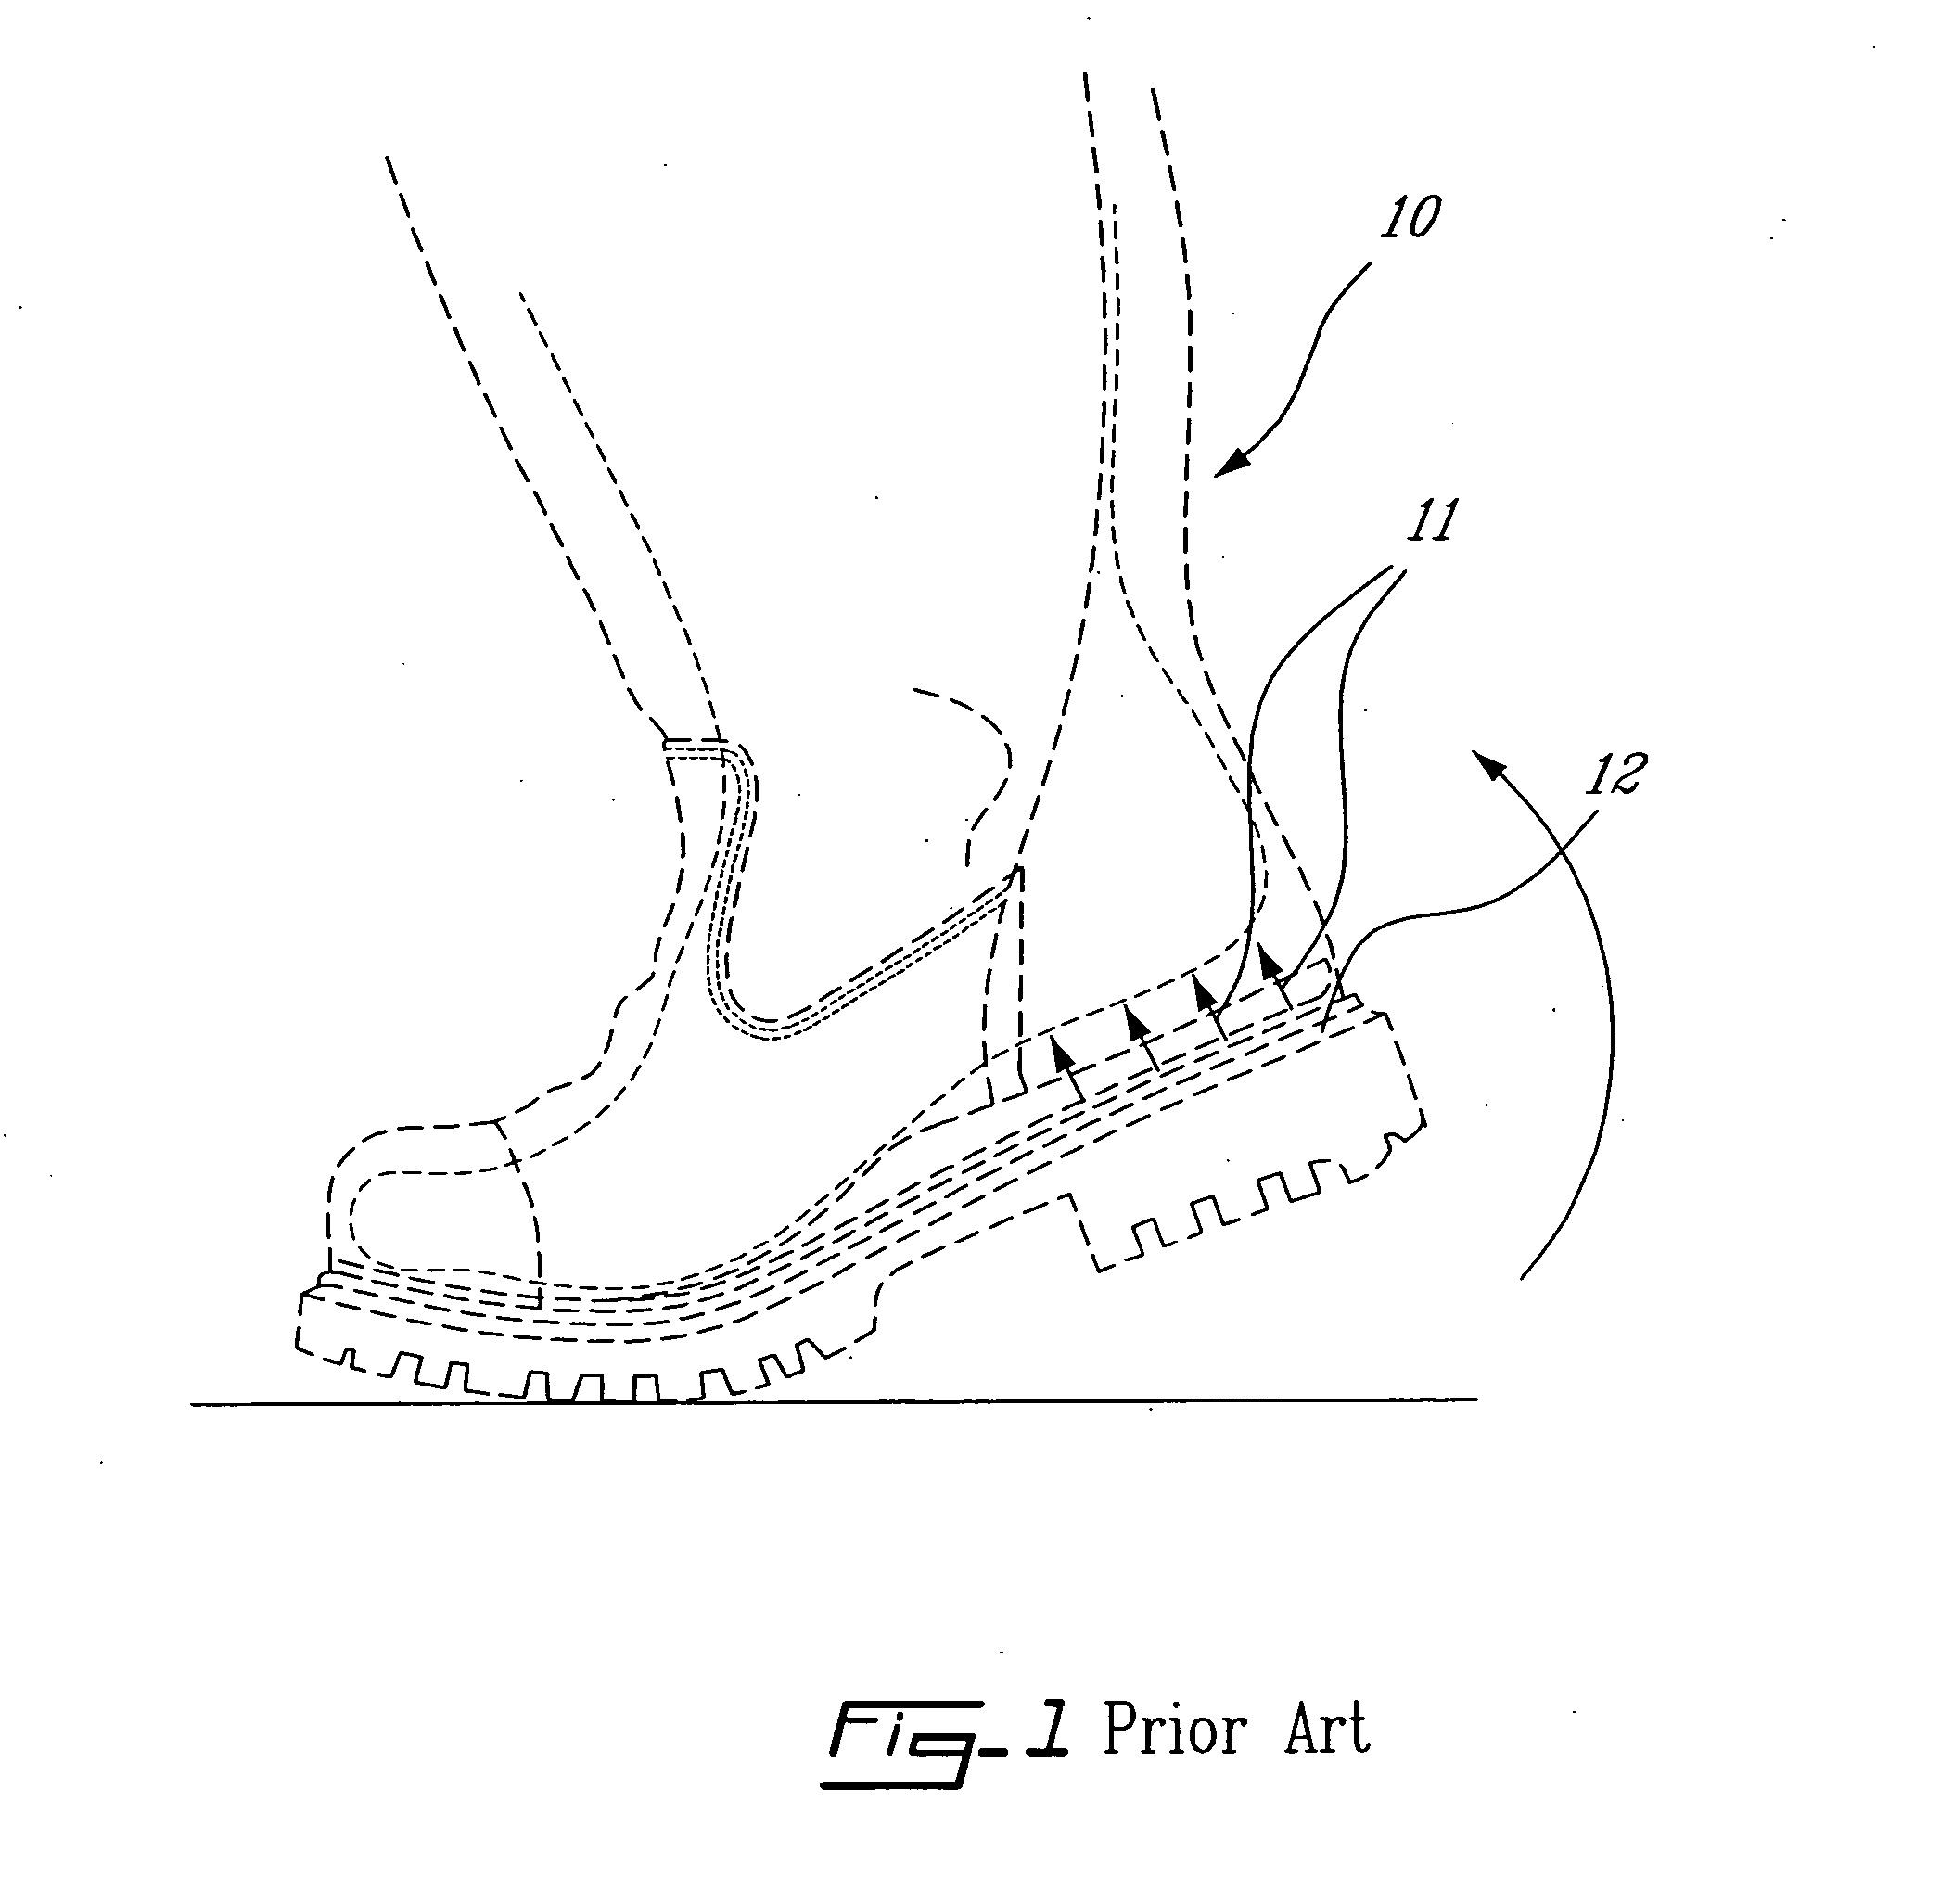 Ankle support designed to maintain proper integral boot fit